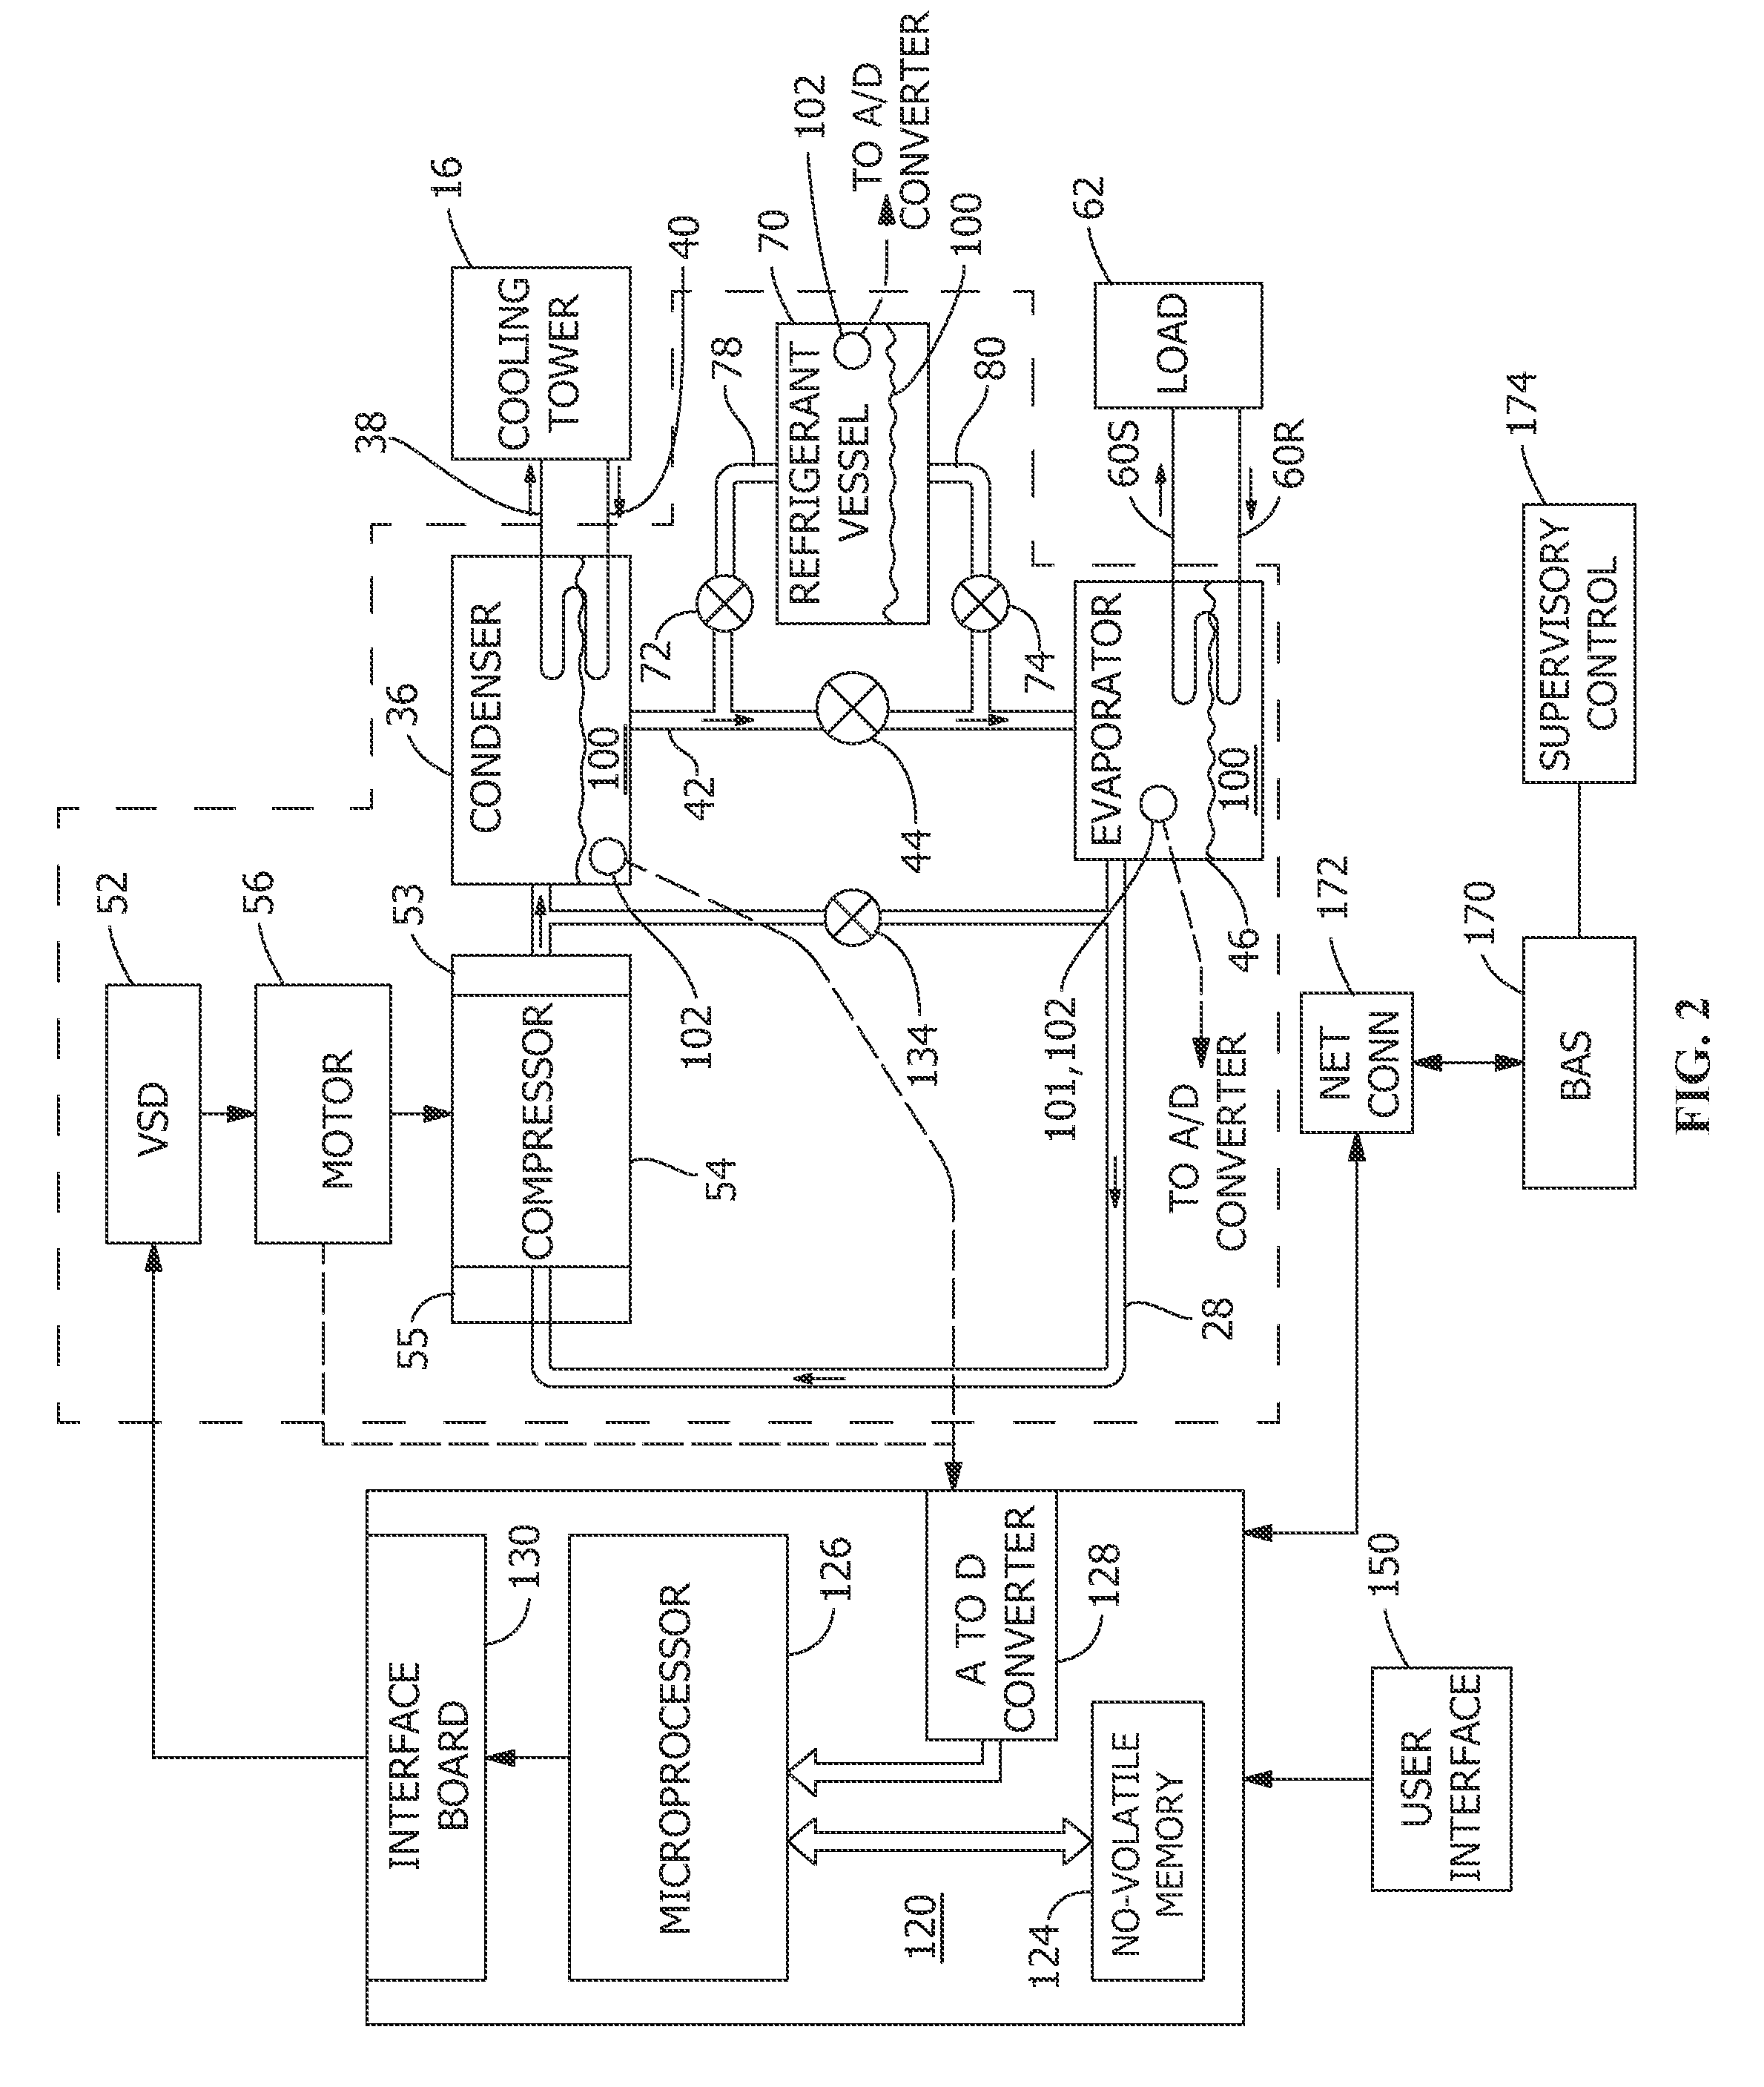 Method and apparatus for variable refrigerant chiller operation